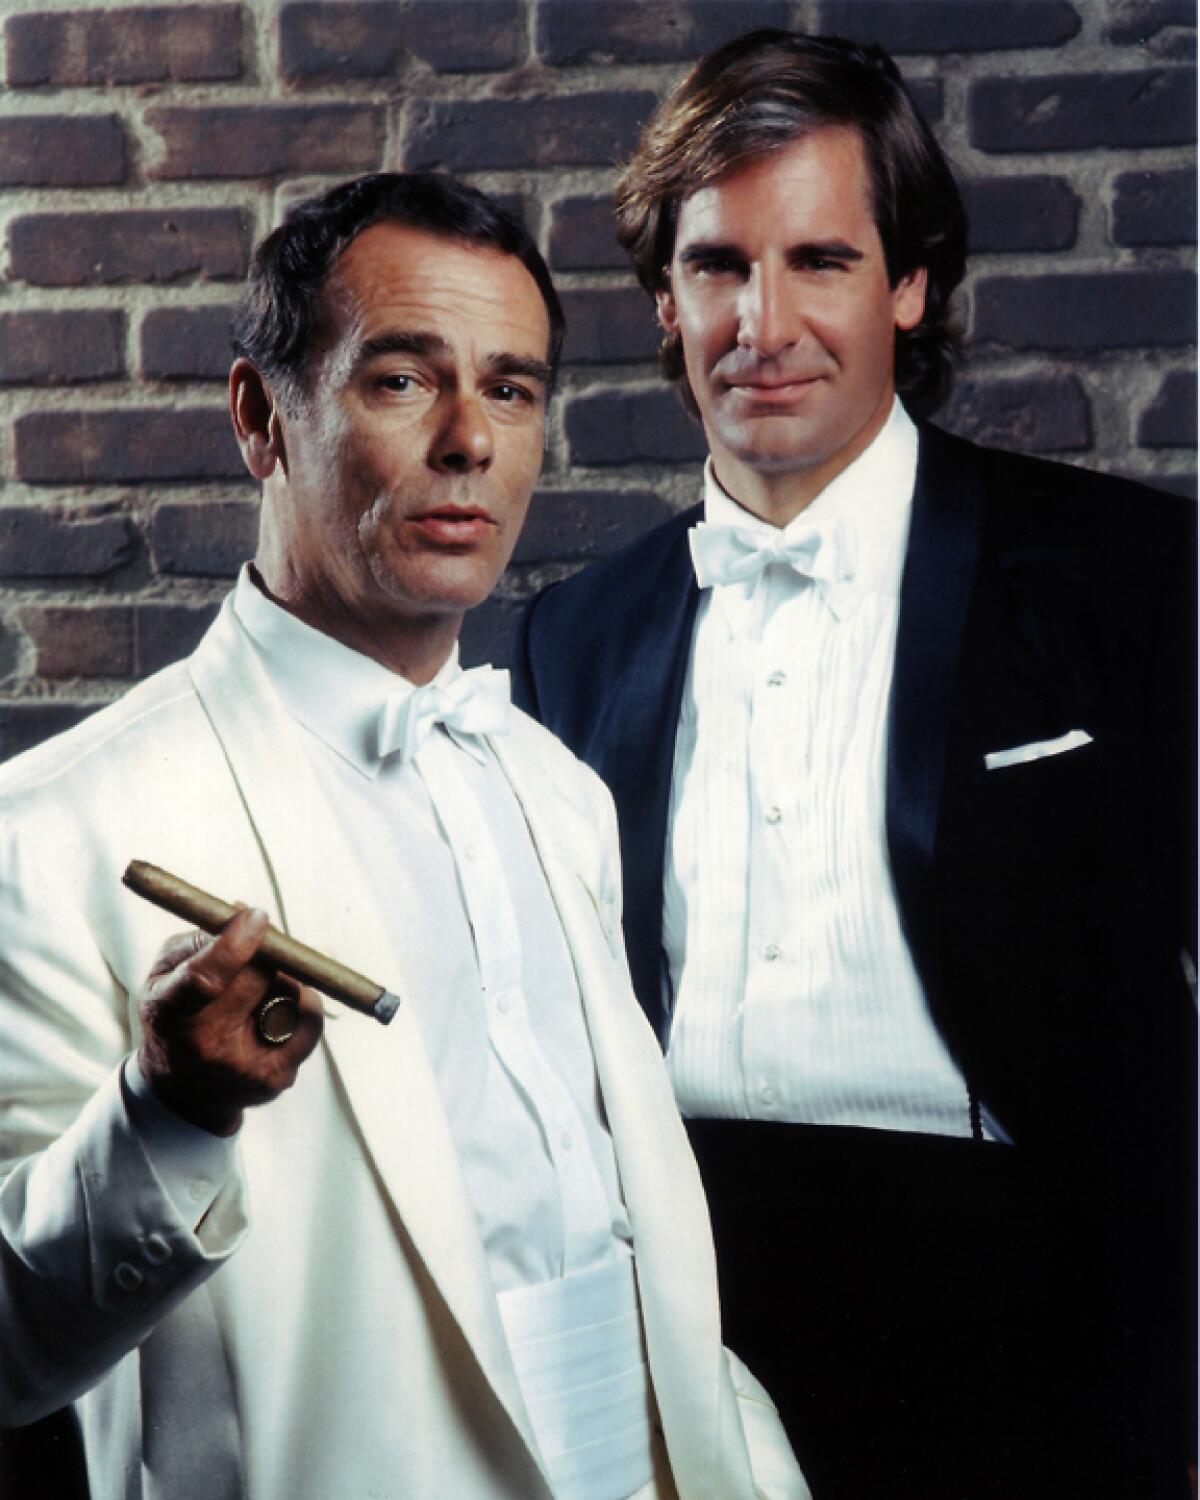 Two men in tuxedos, one holding a cigar